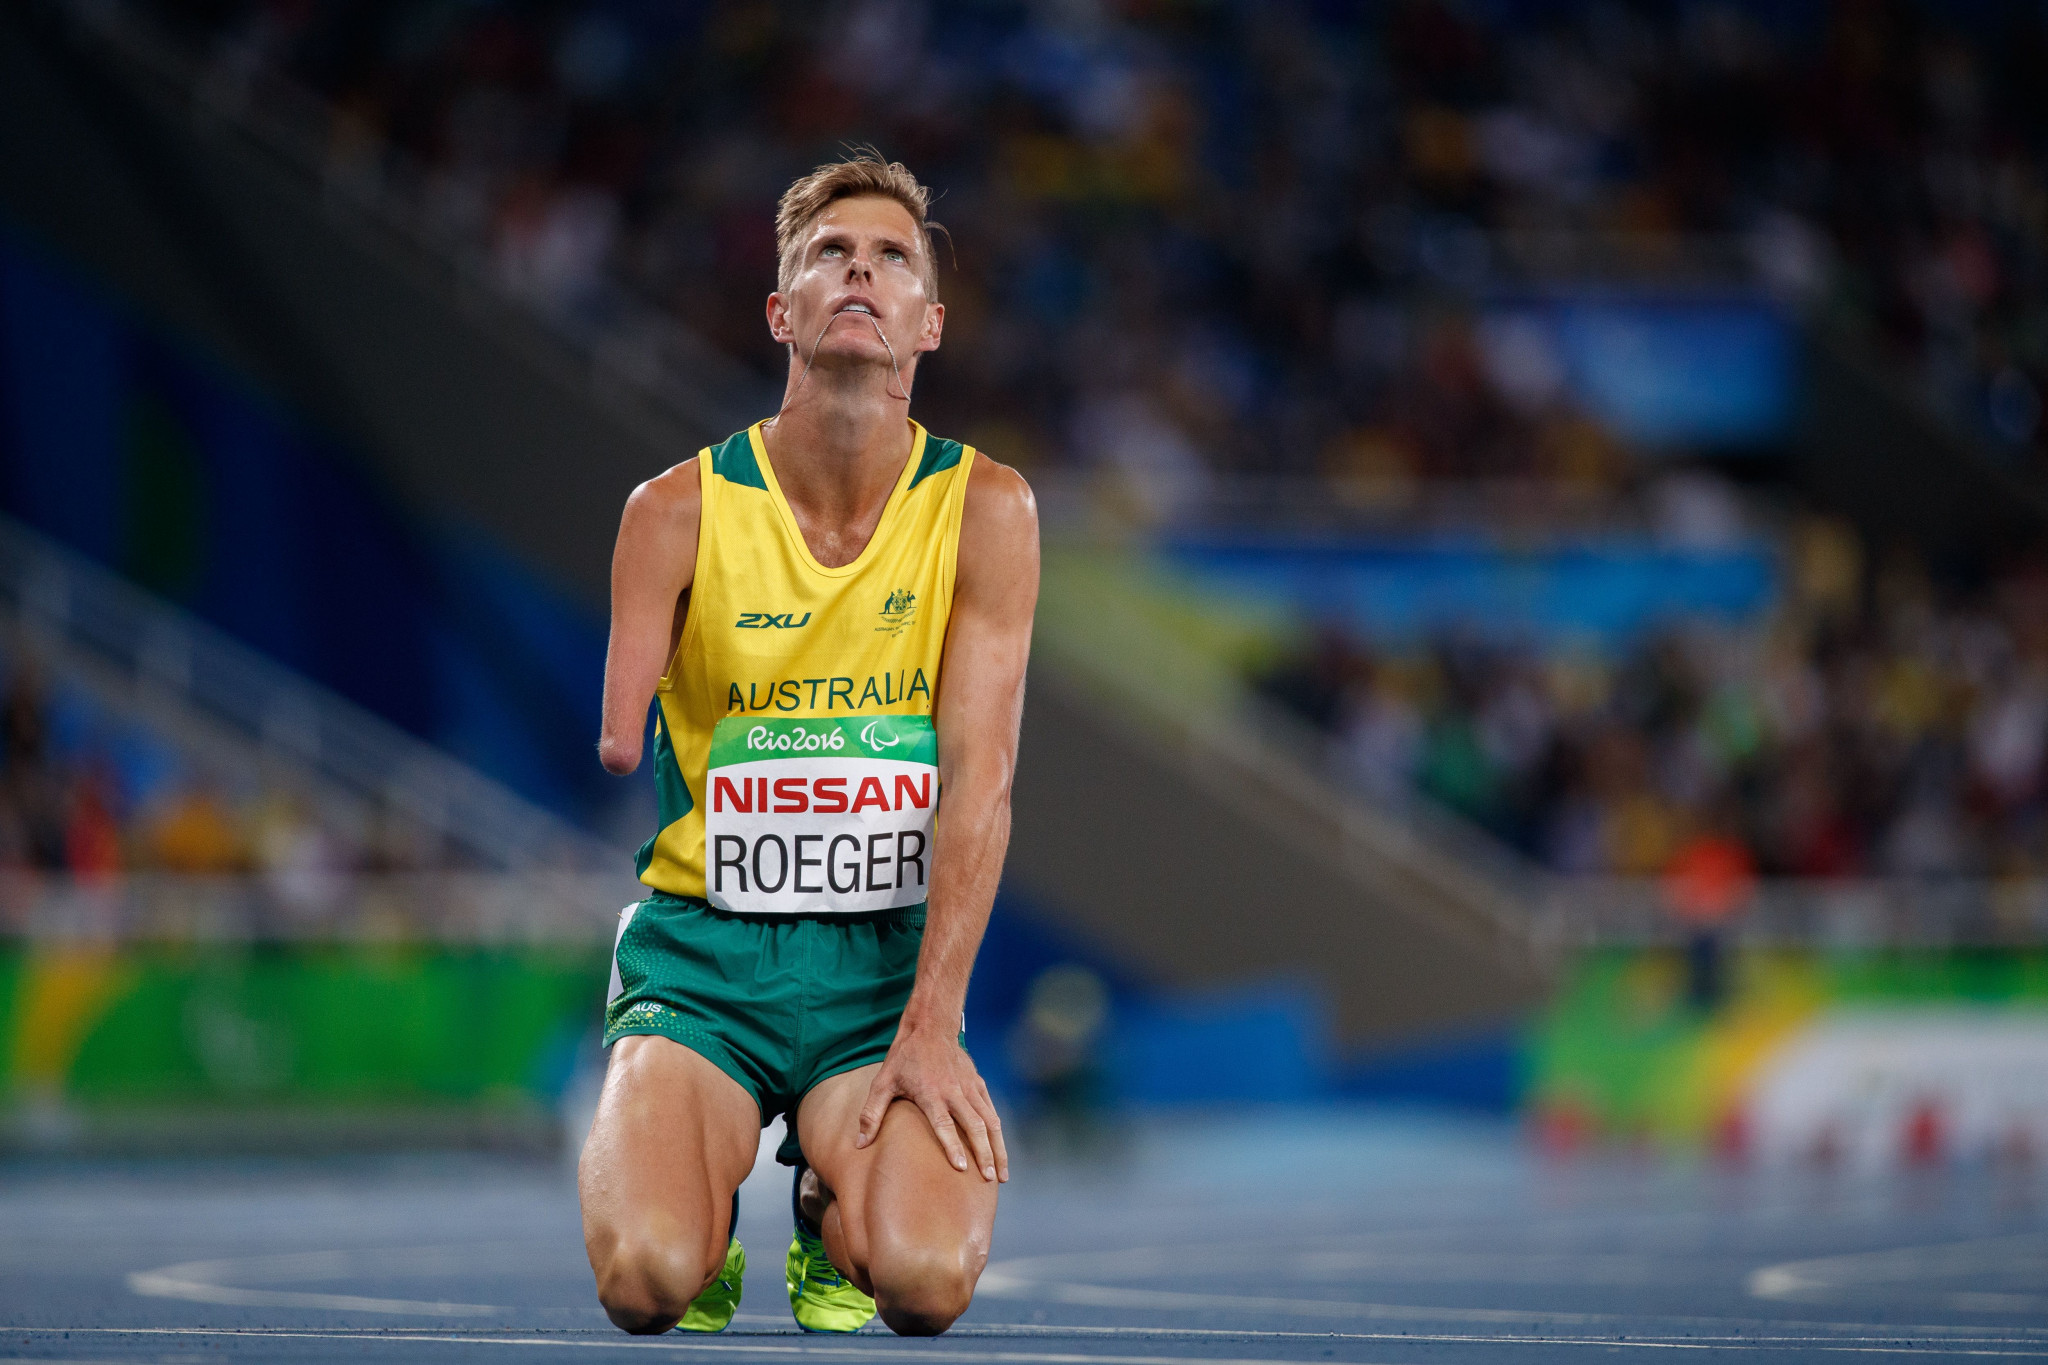 Australia's Michael Roeger is aiming for gold at the World Para Marathon Championships ©Getty Images